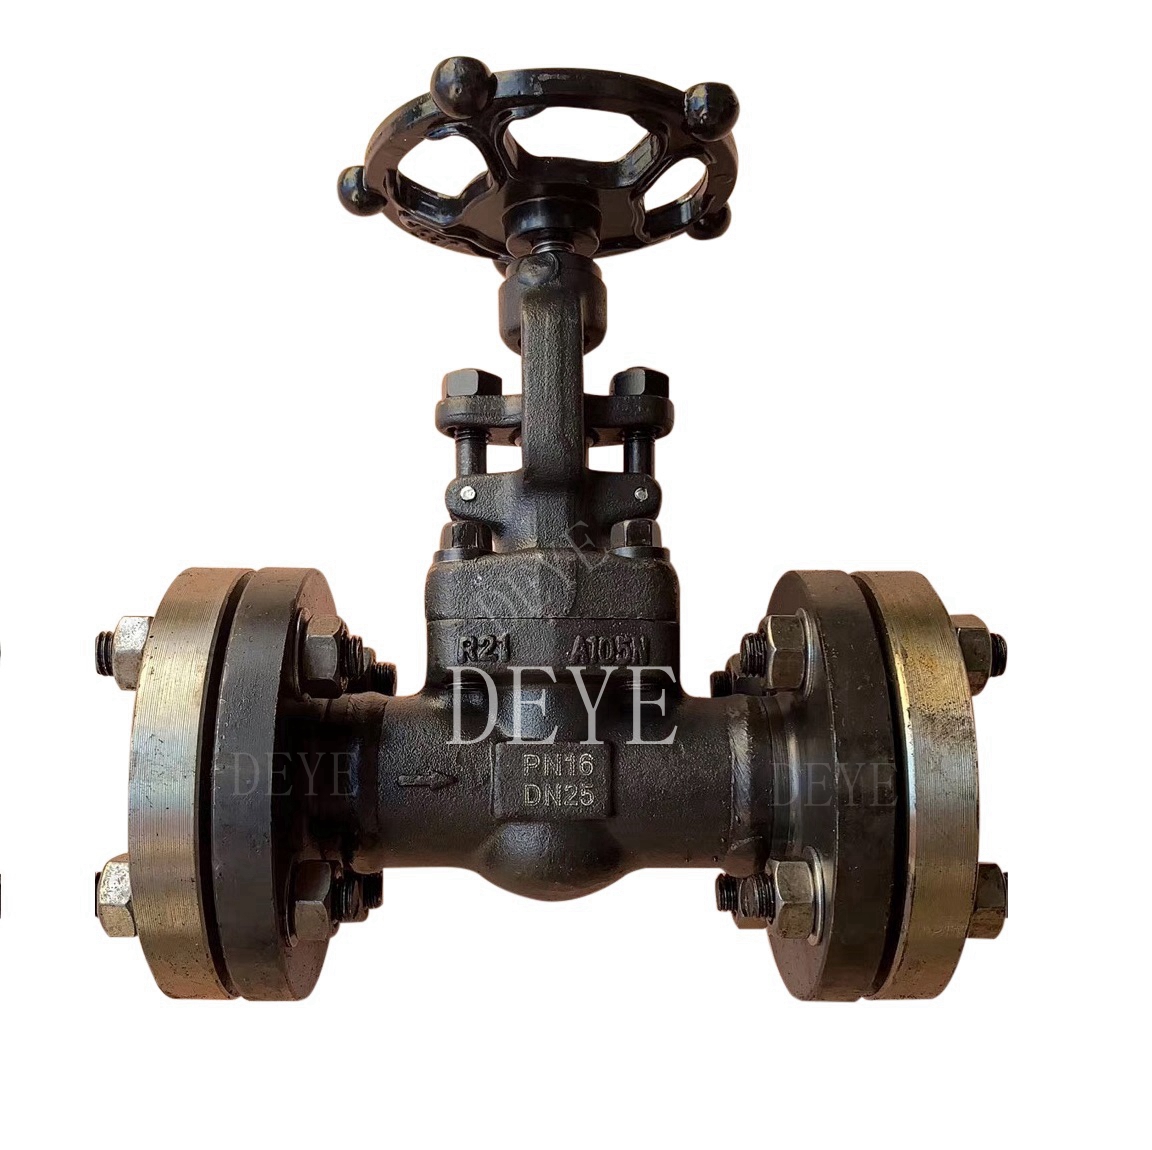 2020 High quality Api600/Api 6d Ball Valve -
 A105 Forged steel Gate Valve with counter flanges GVC-0016-1F – Deye